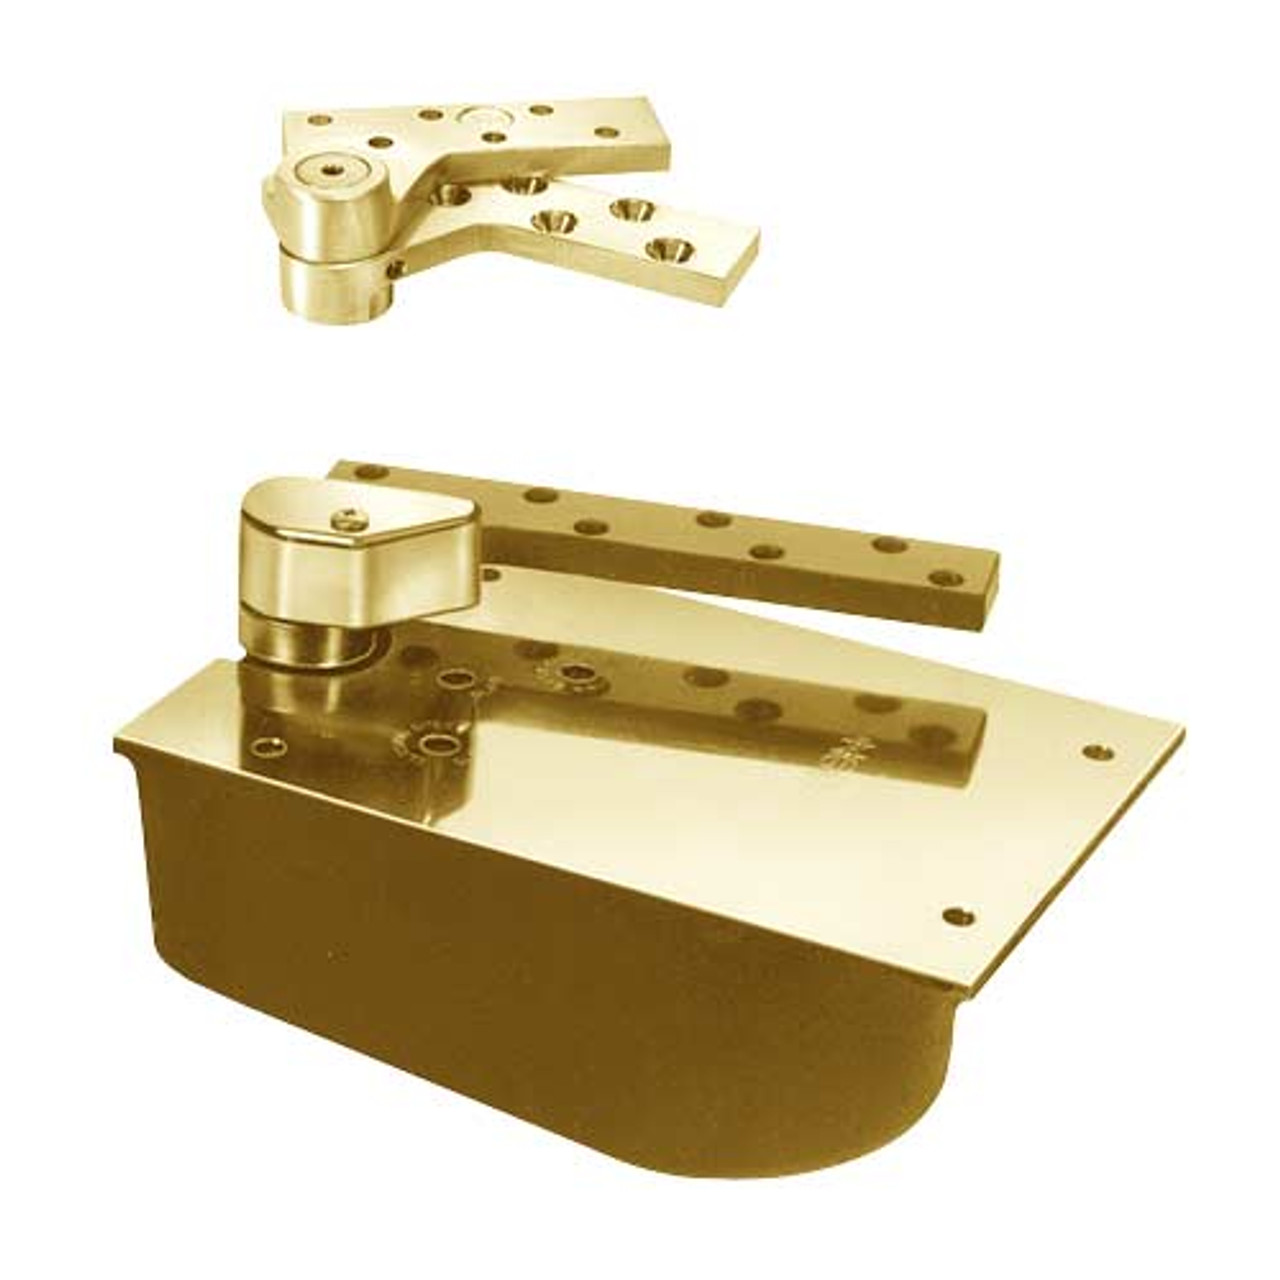 L27-95N-LTP-LH-2-605 Rixson 27 Series Extra Heavy Duty Lead Lined Offset Floor Closer in Bright Brass Finish